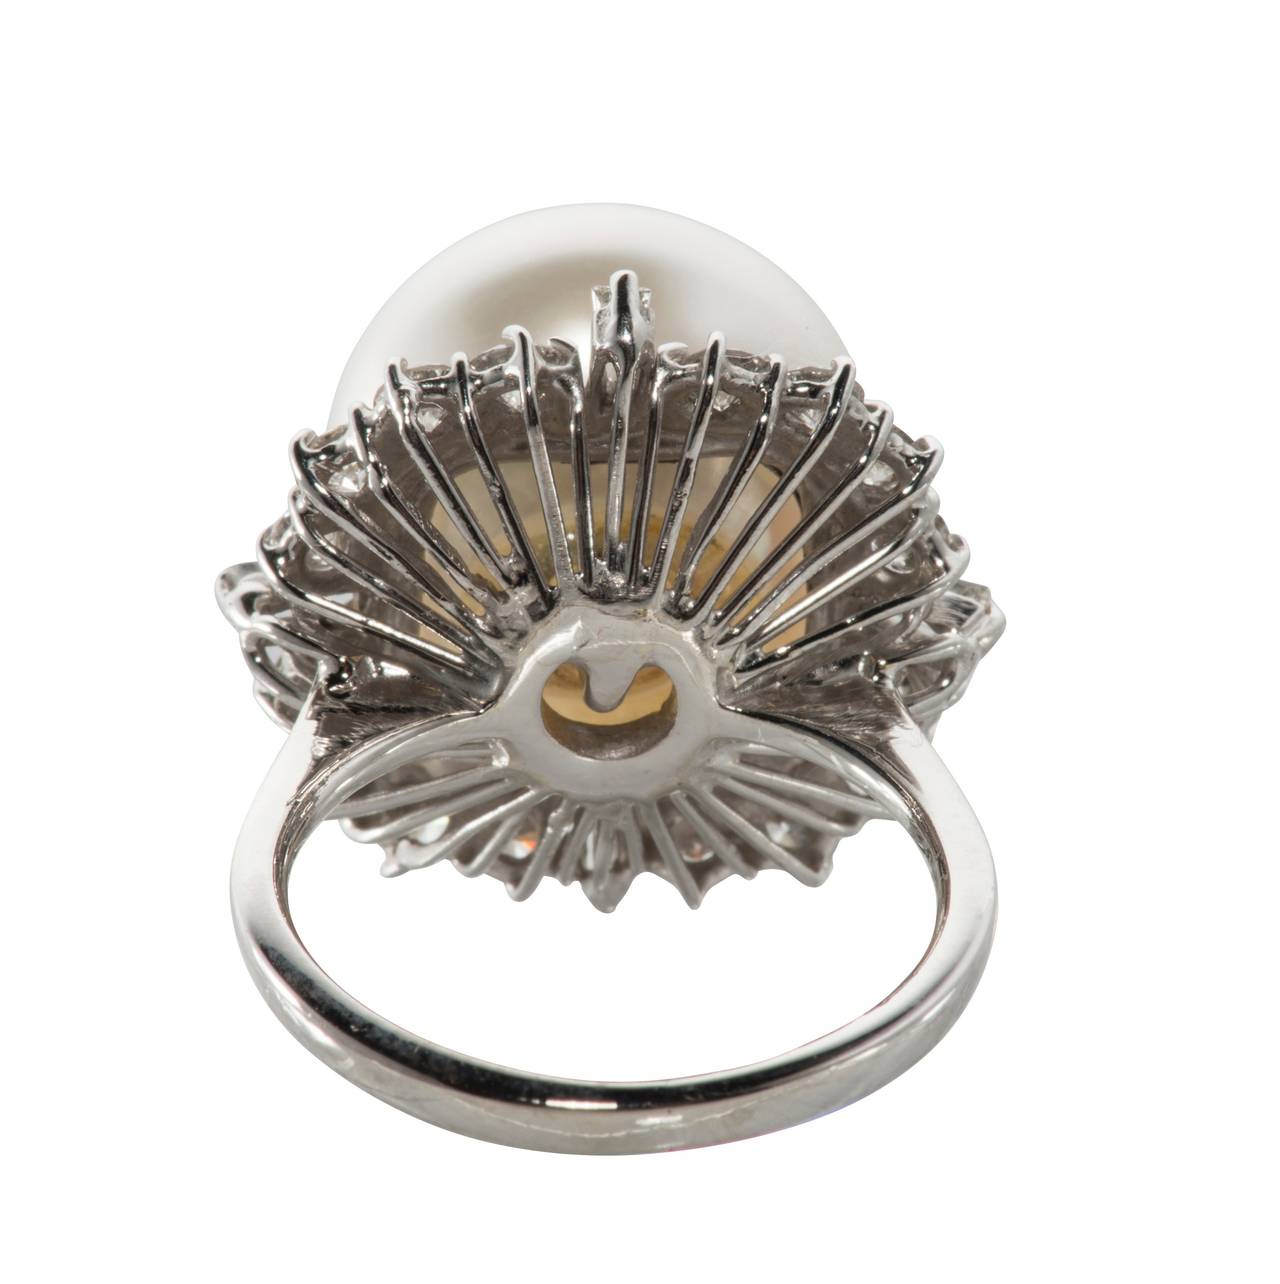 Elegant South Sea pearl and diamond cocktail ring. The pearl is 14mm and the ring size is 5 1/2.  This ring can easily be resized.